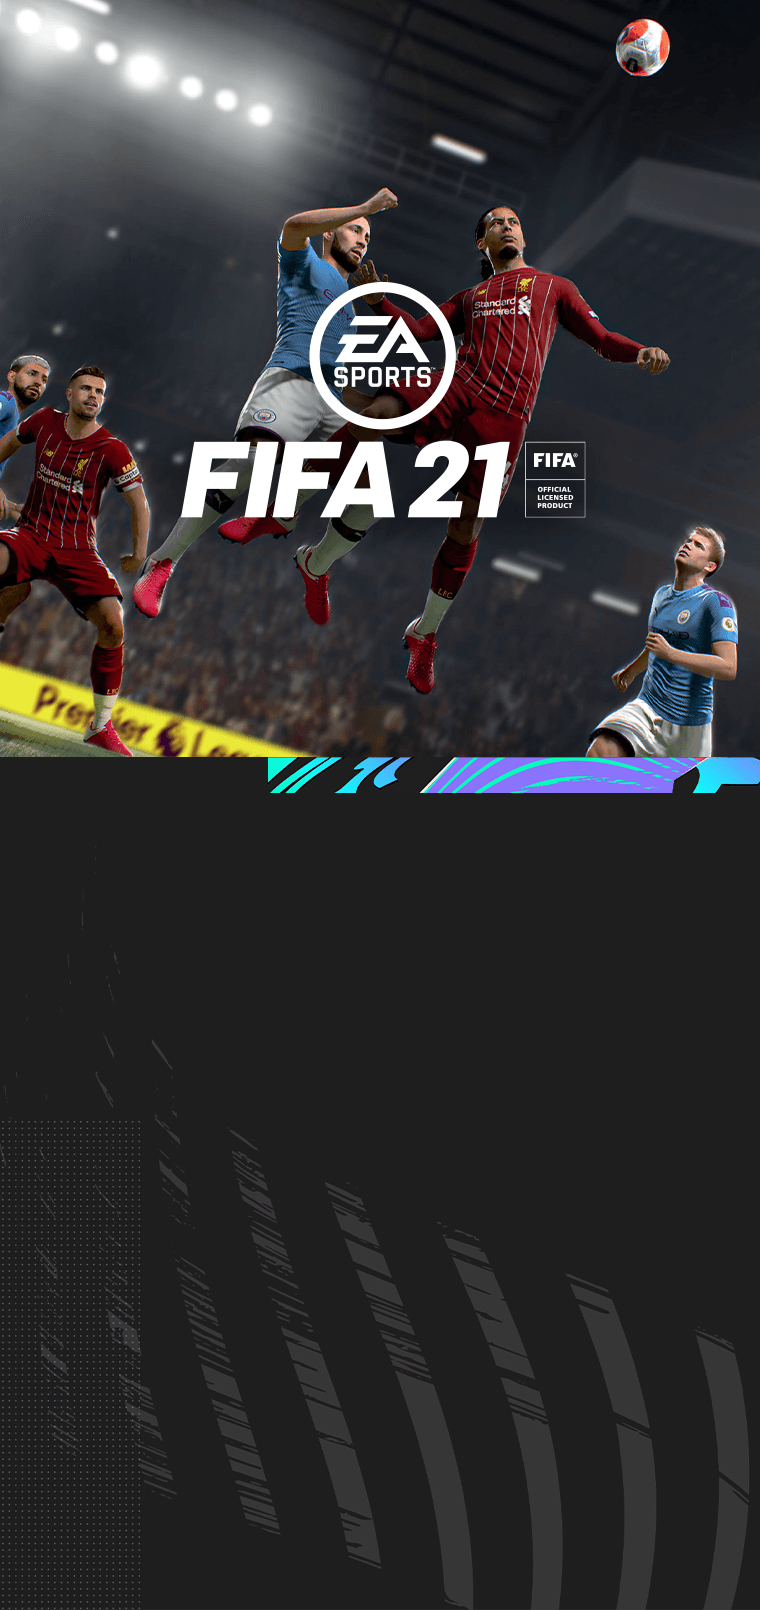 FIFA 21 Game Wallpapers - Wallpaper Cave